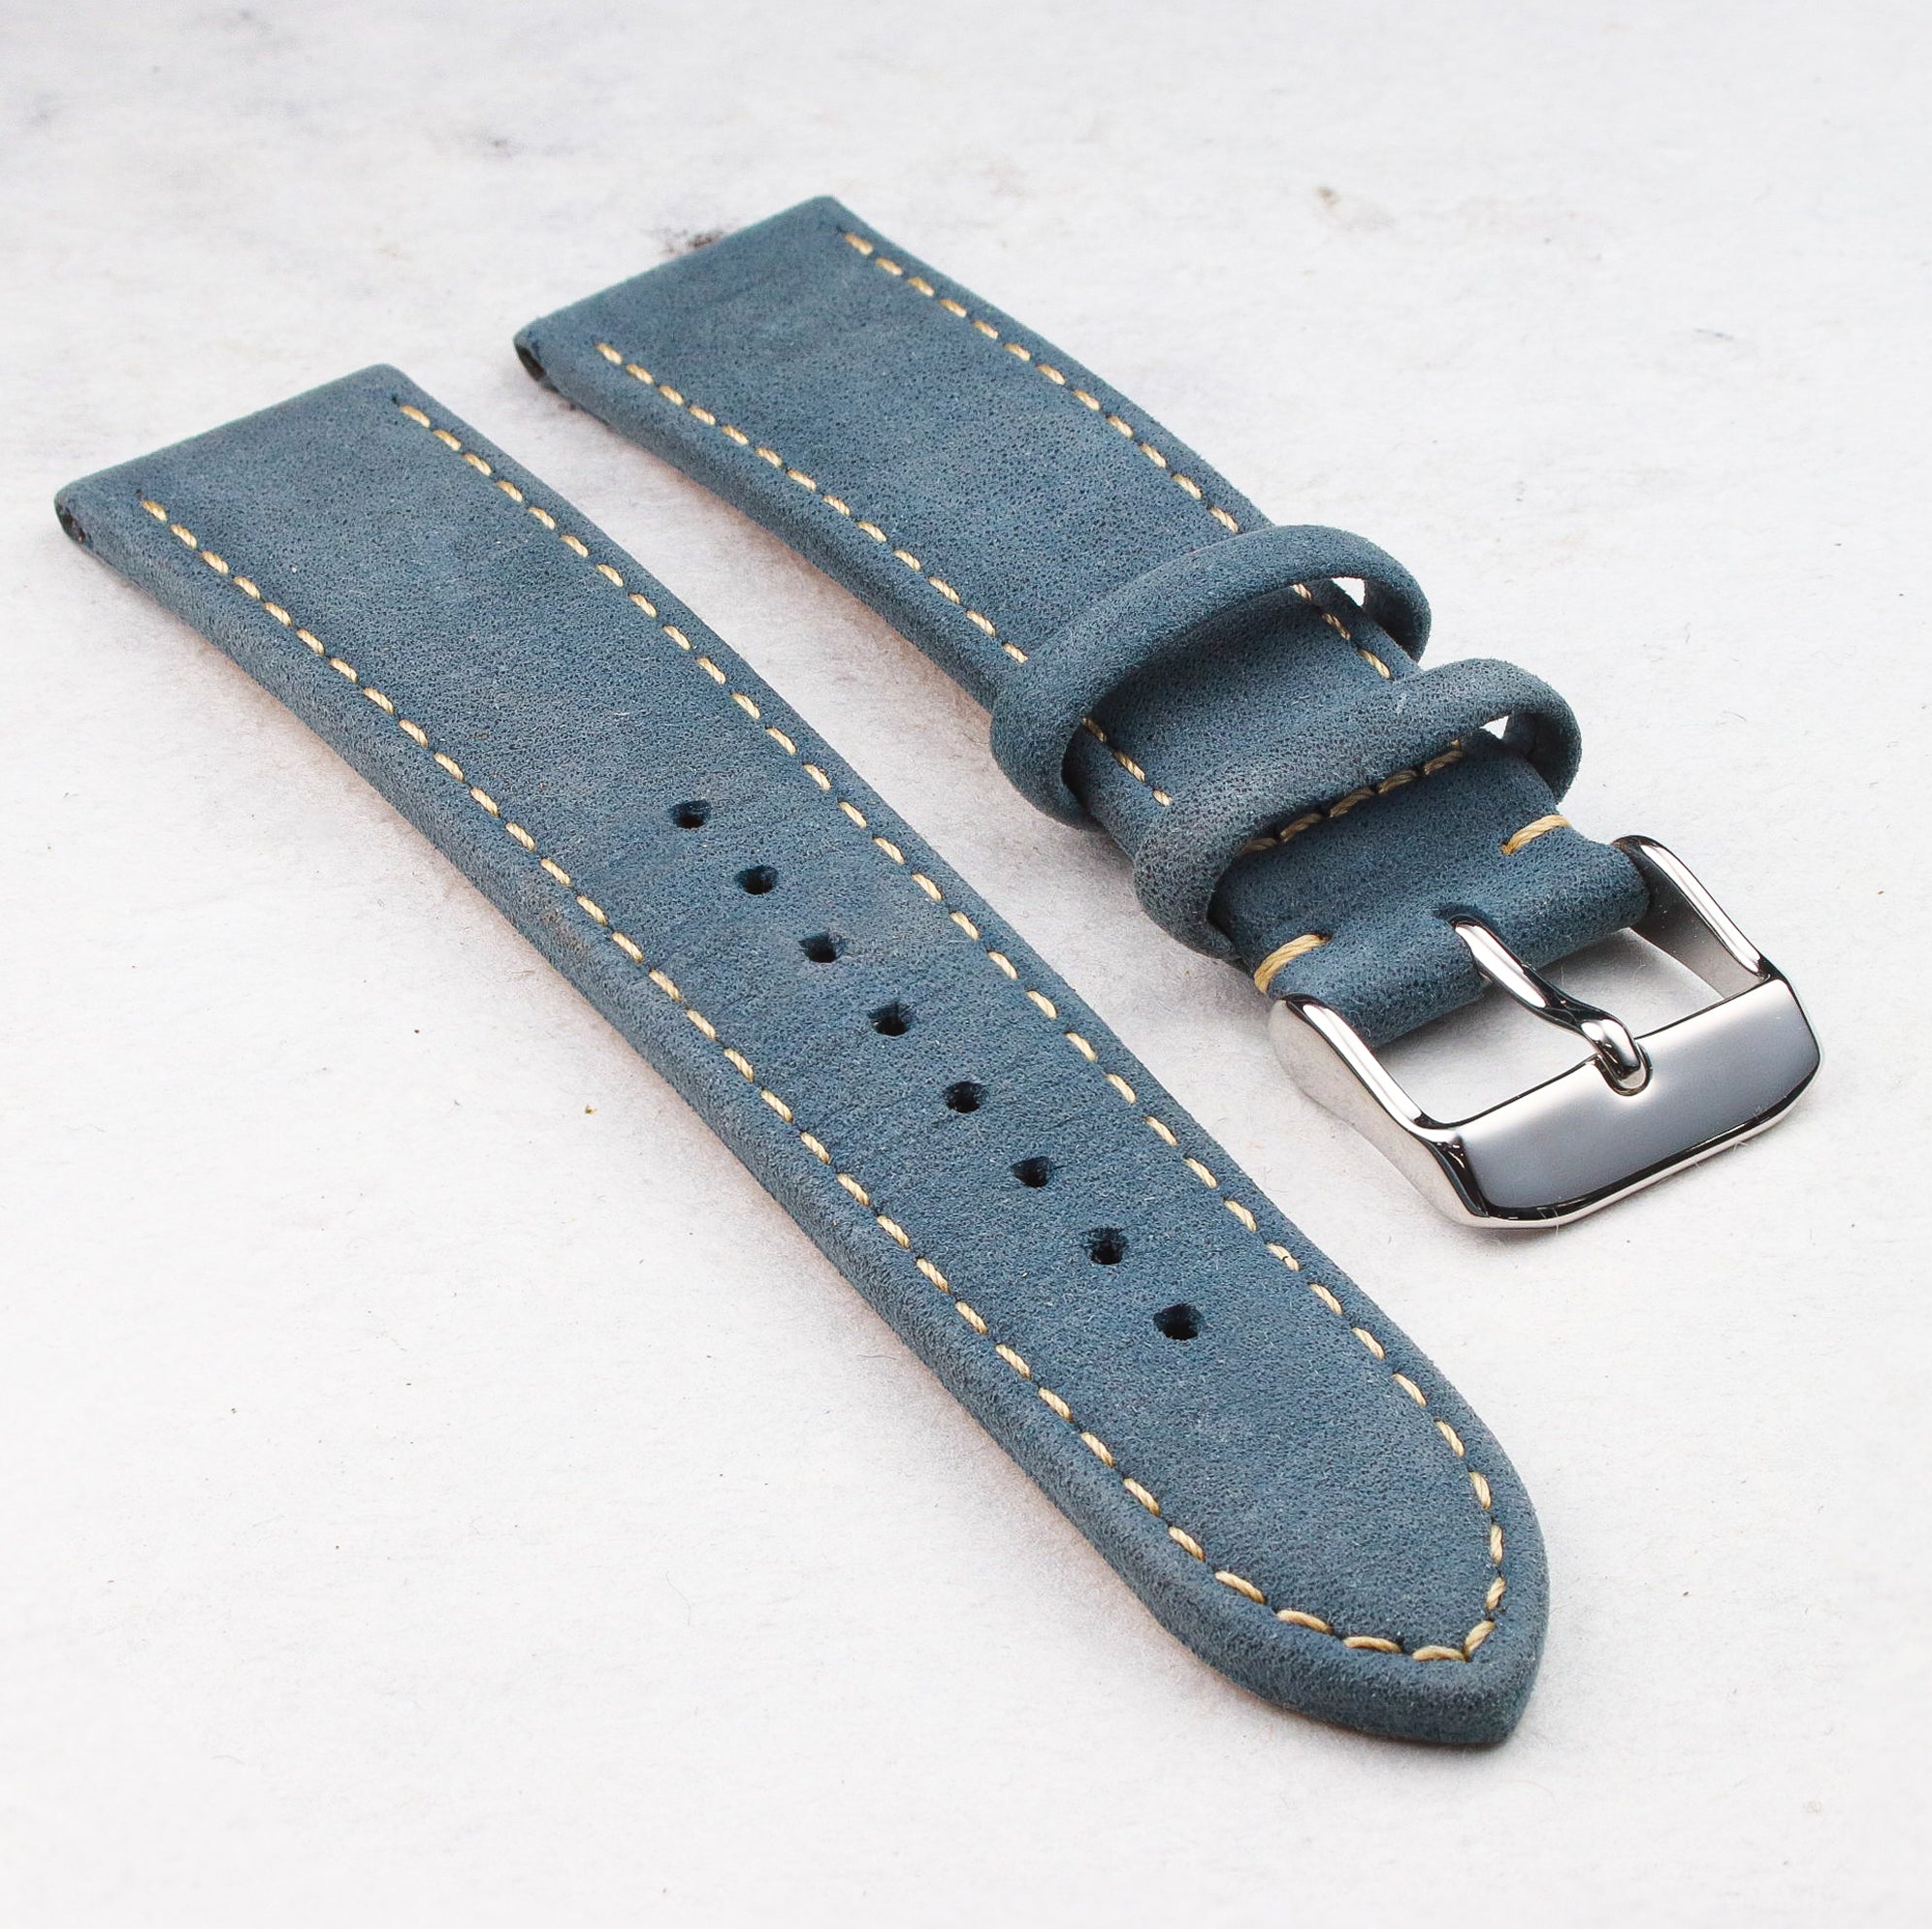 Suade Leather Strap - Wancher Watch Wancher Watch Blue Wancher Watch Suade Leather Strap {{ Automatic Watch {{ Watch }} }} {{ Japan }}  Genuine Leather Strap with Silver Pin Closure by Wancher